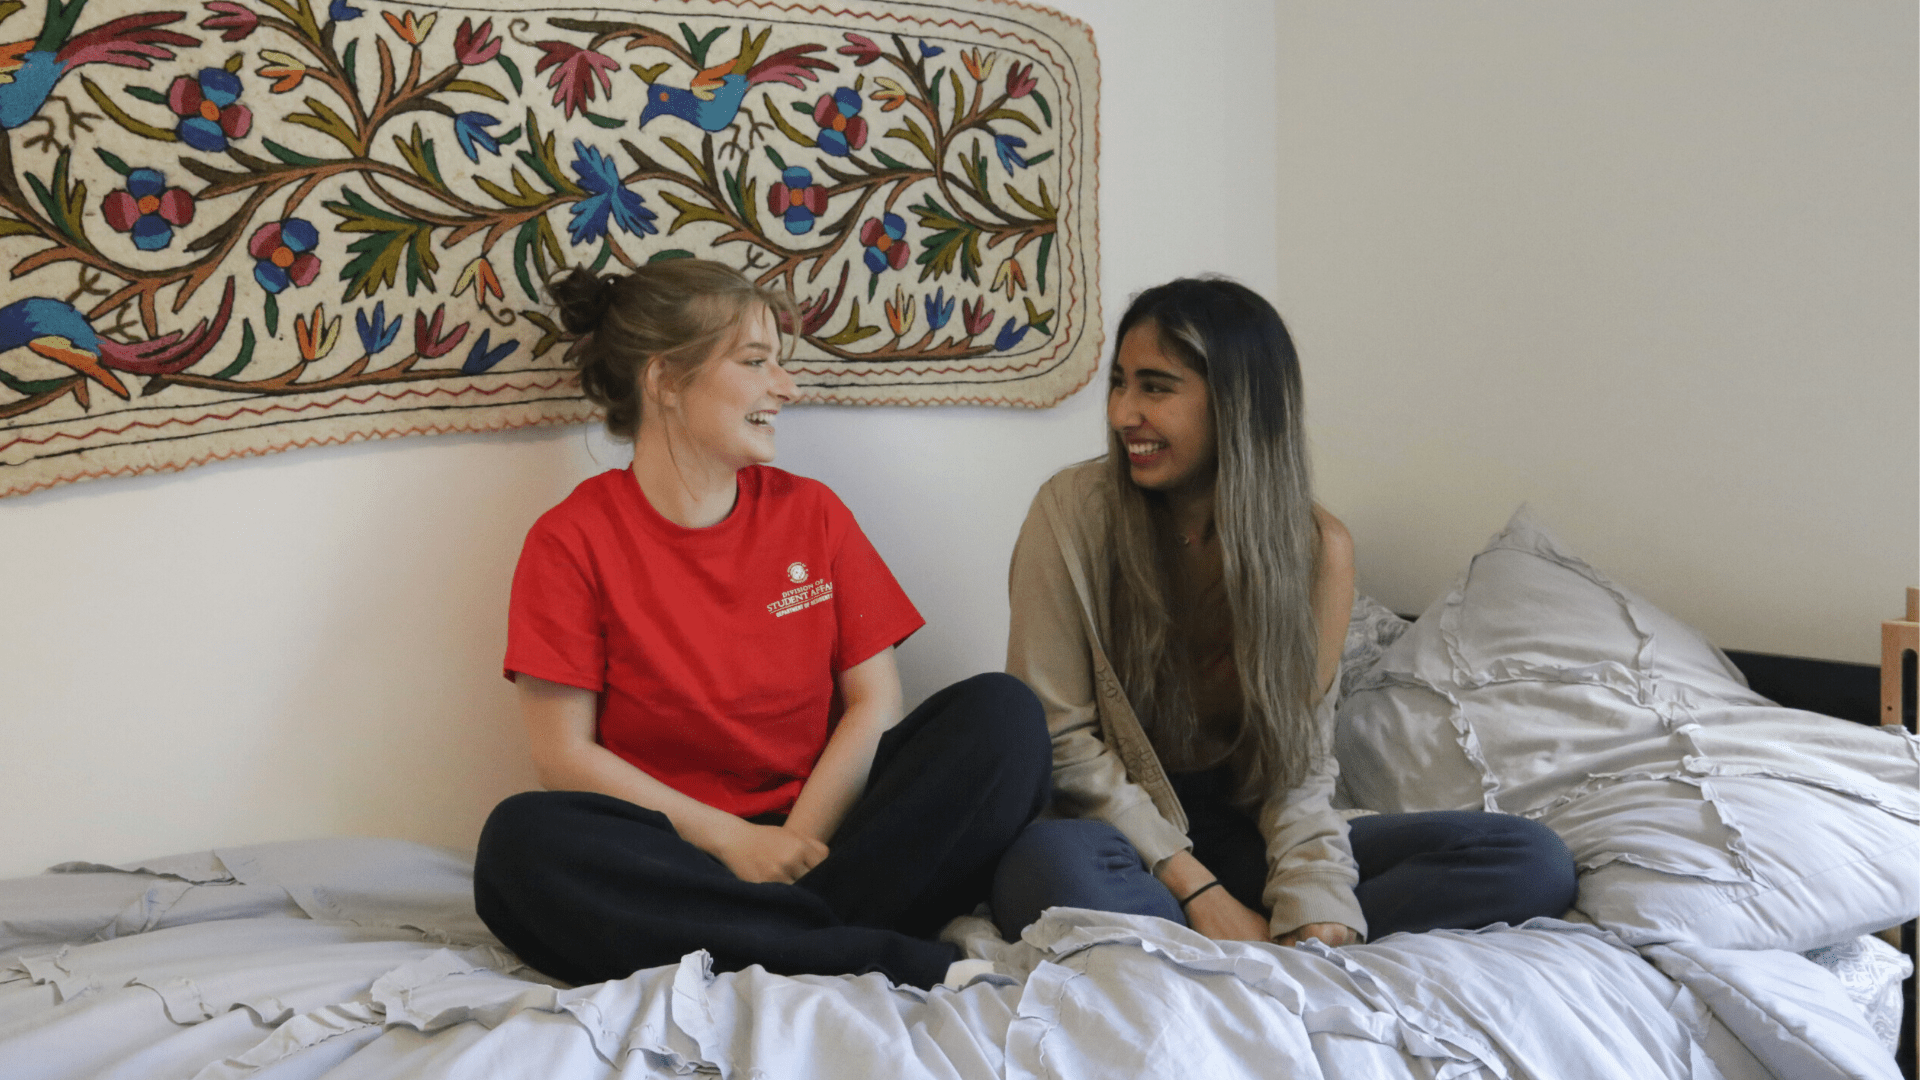 two students in dorm room chatting on a bed